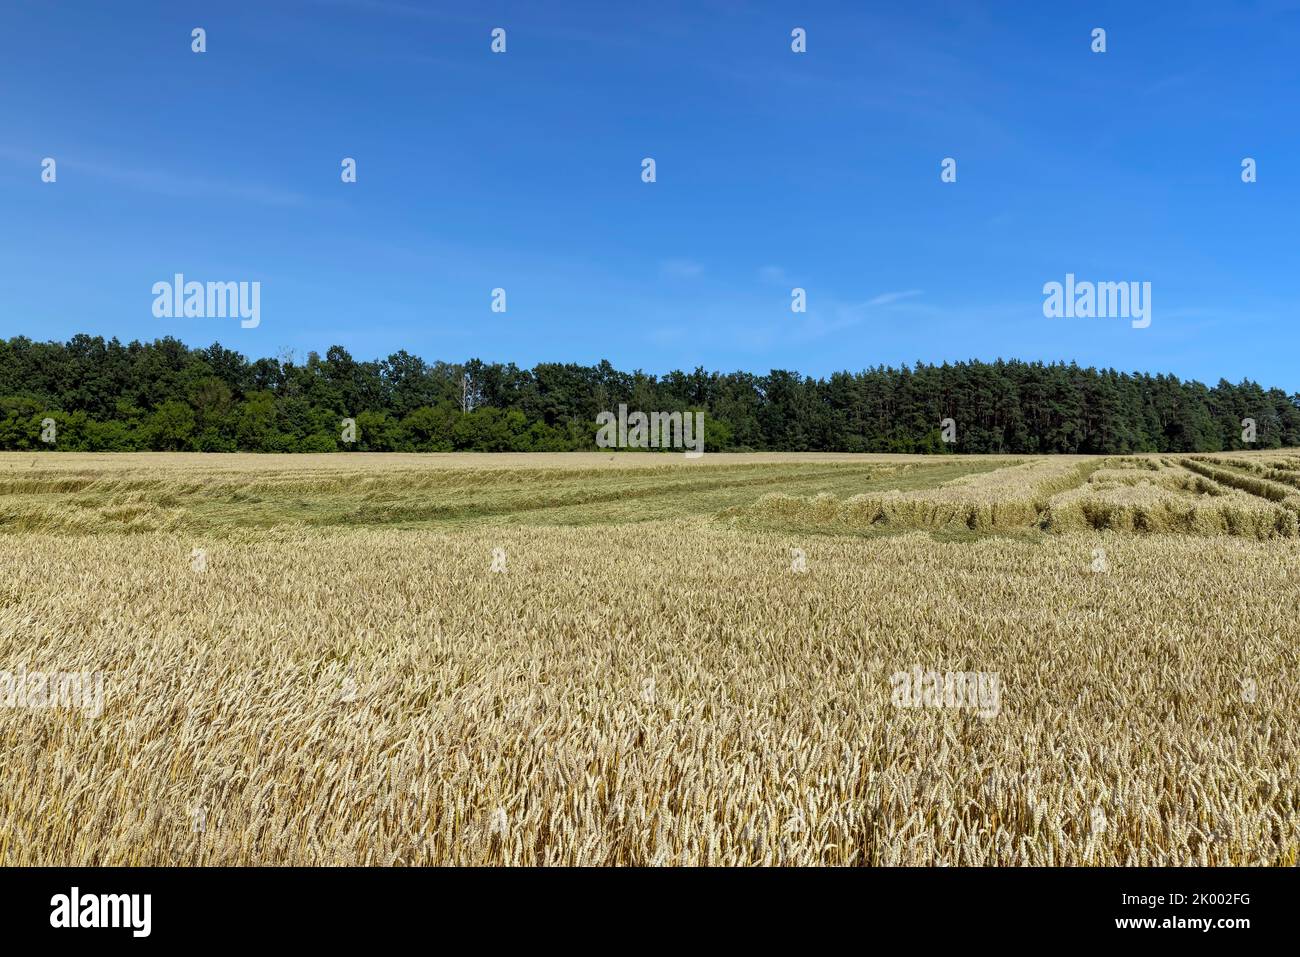 An agricultural field where wheat is grown, which is necessary for making bread, a field with cereals during cultivation Stock Photo